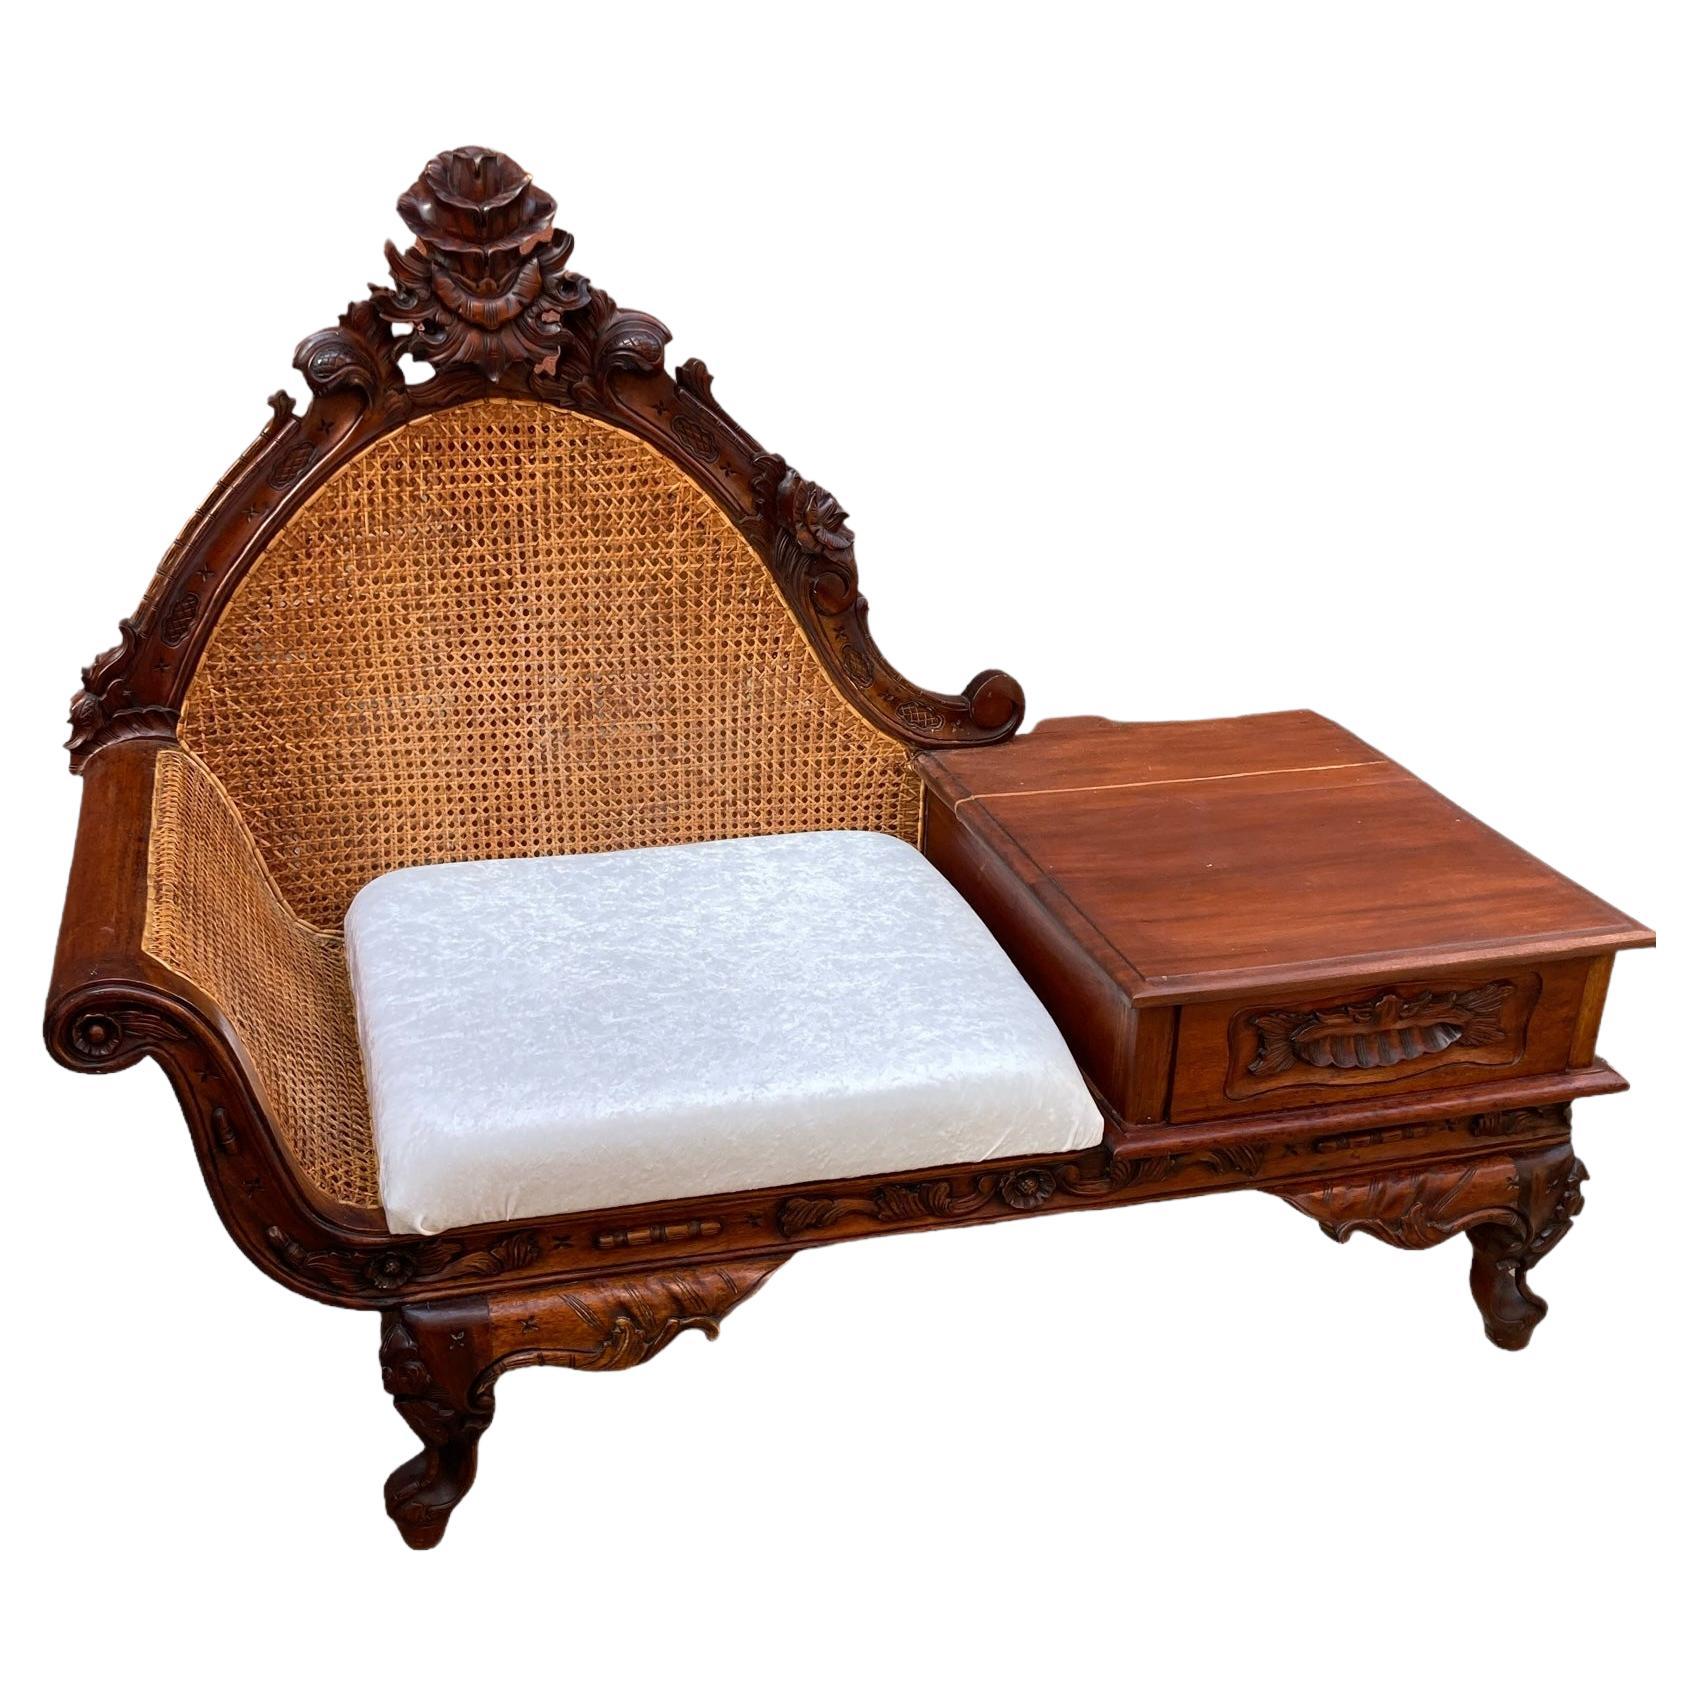 Original Hand Carved Mahogany Victorian Telephone or Gossip Bench, Bergere 